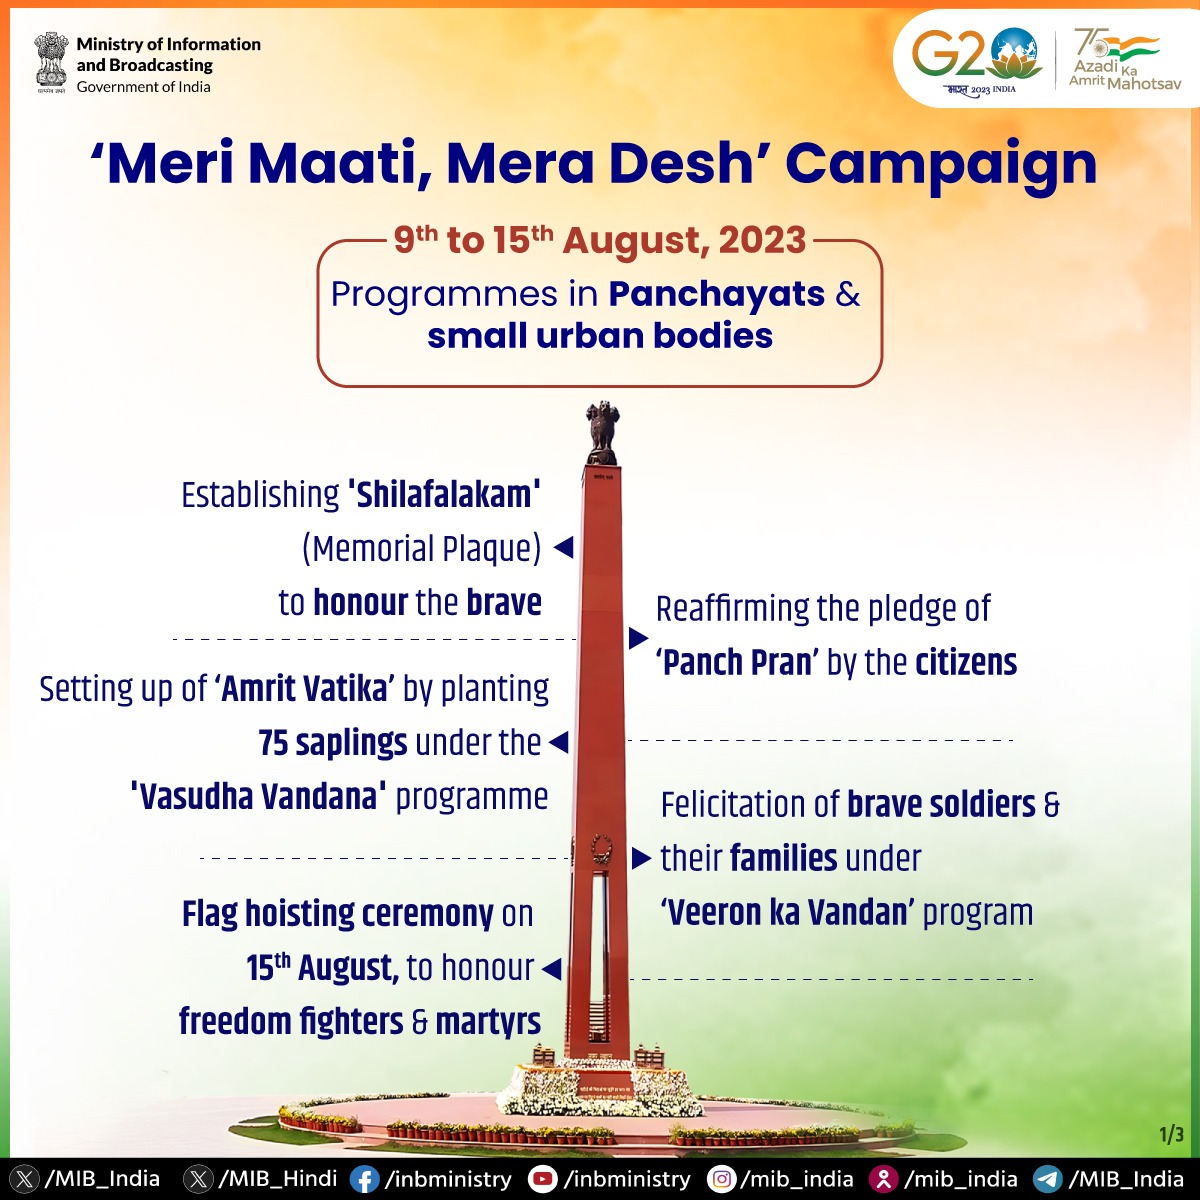 As 🇮🇳 is brimming with joy of 76th Independence Day
Join #Meri_Maati_Mera_Desh Campaign

➡9th - 15th August, 2023

💠Establishing Shilafalakam (Memorial Plaque) to honour the brave

💠Reaffirming the pledge of #PanchPran by the citizens

💠Setting up of #AmritVatika by planting…